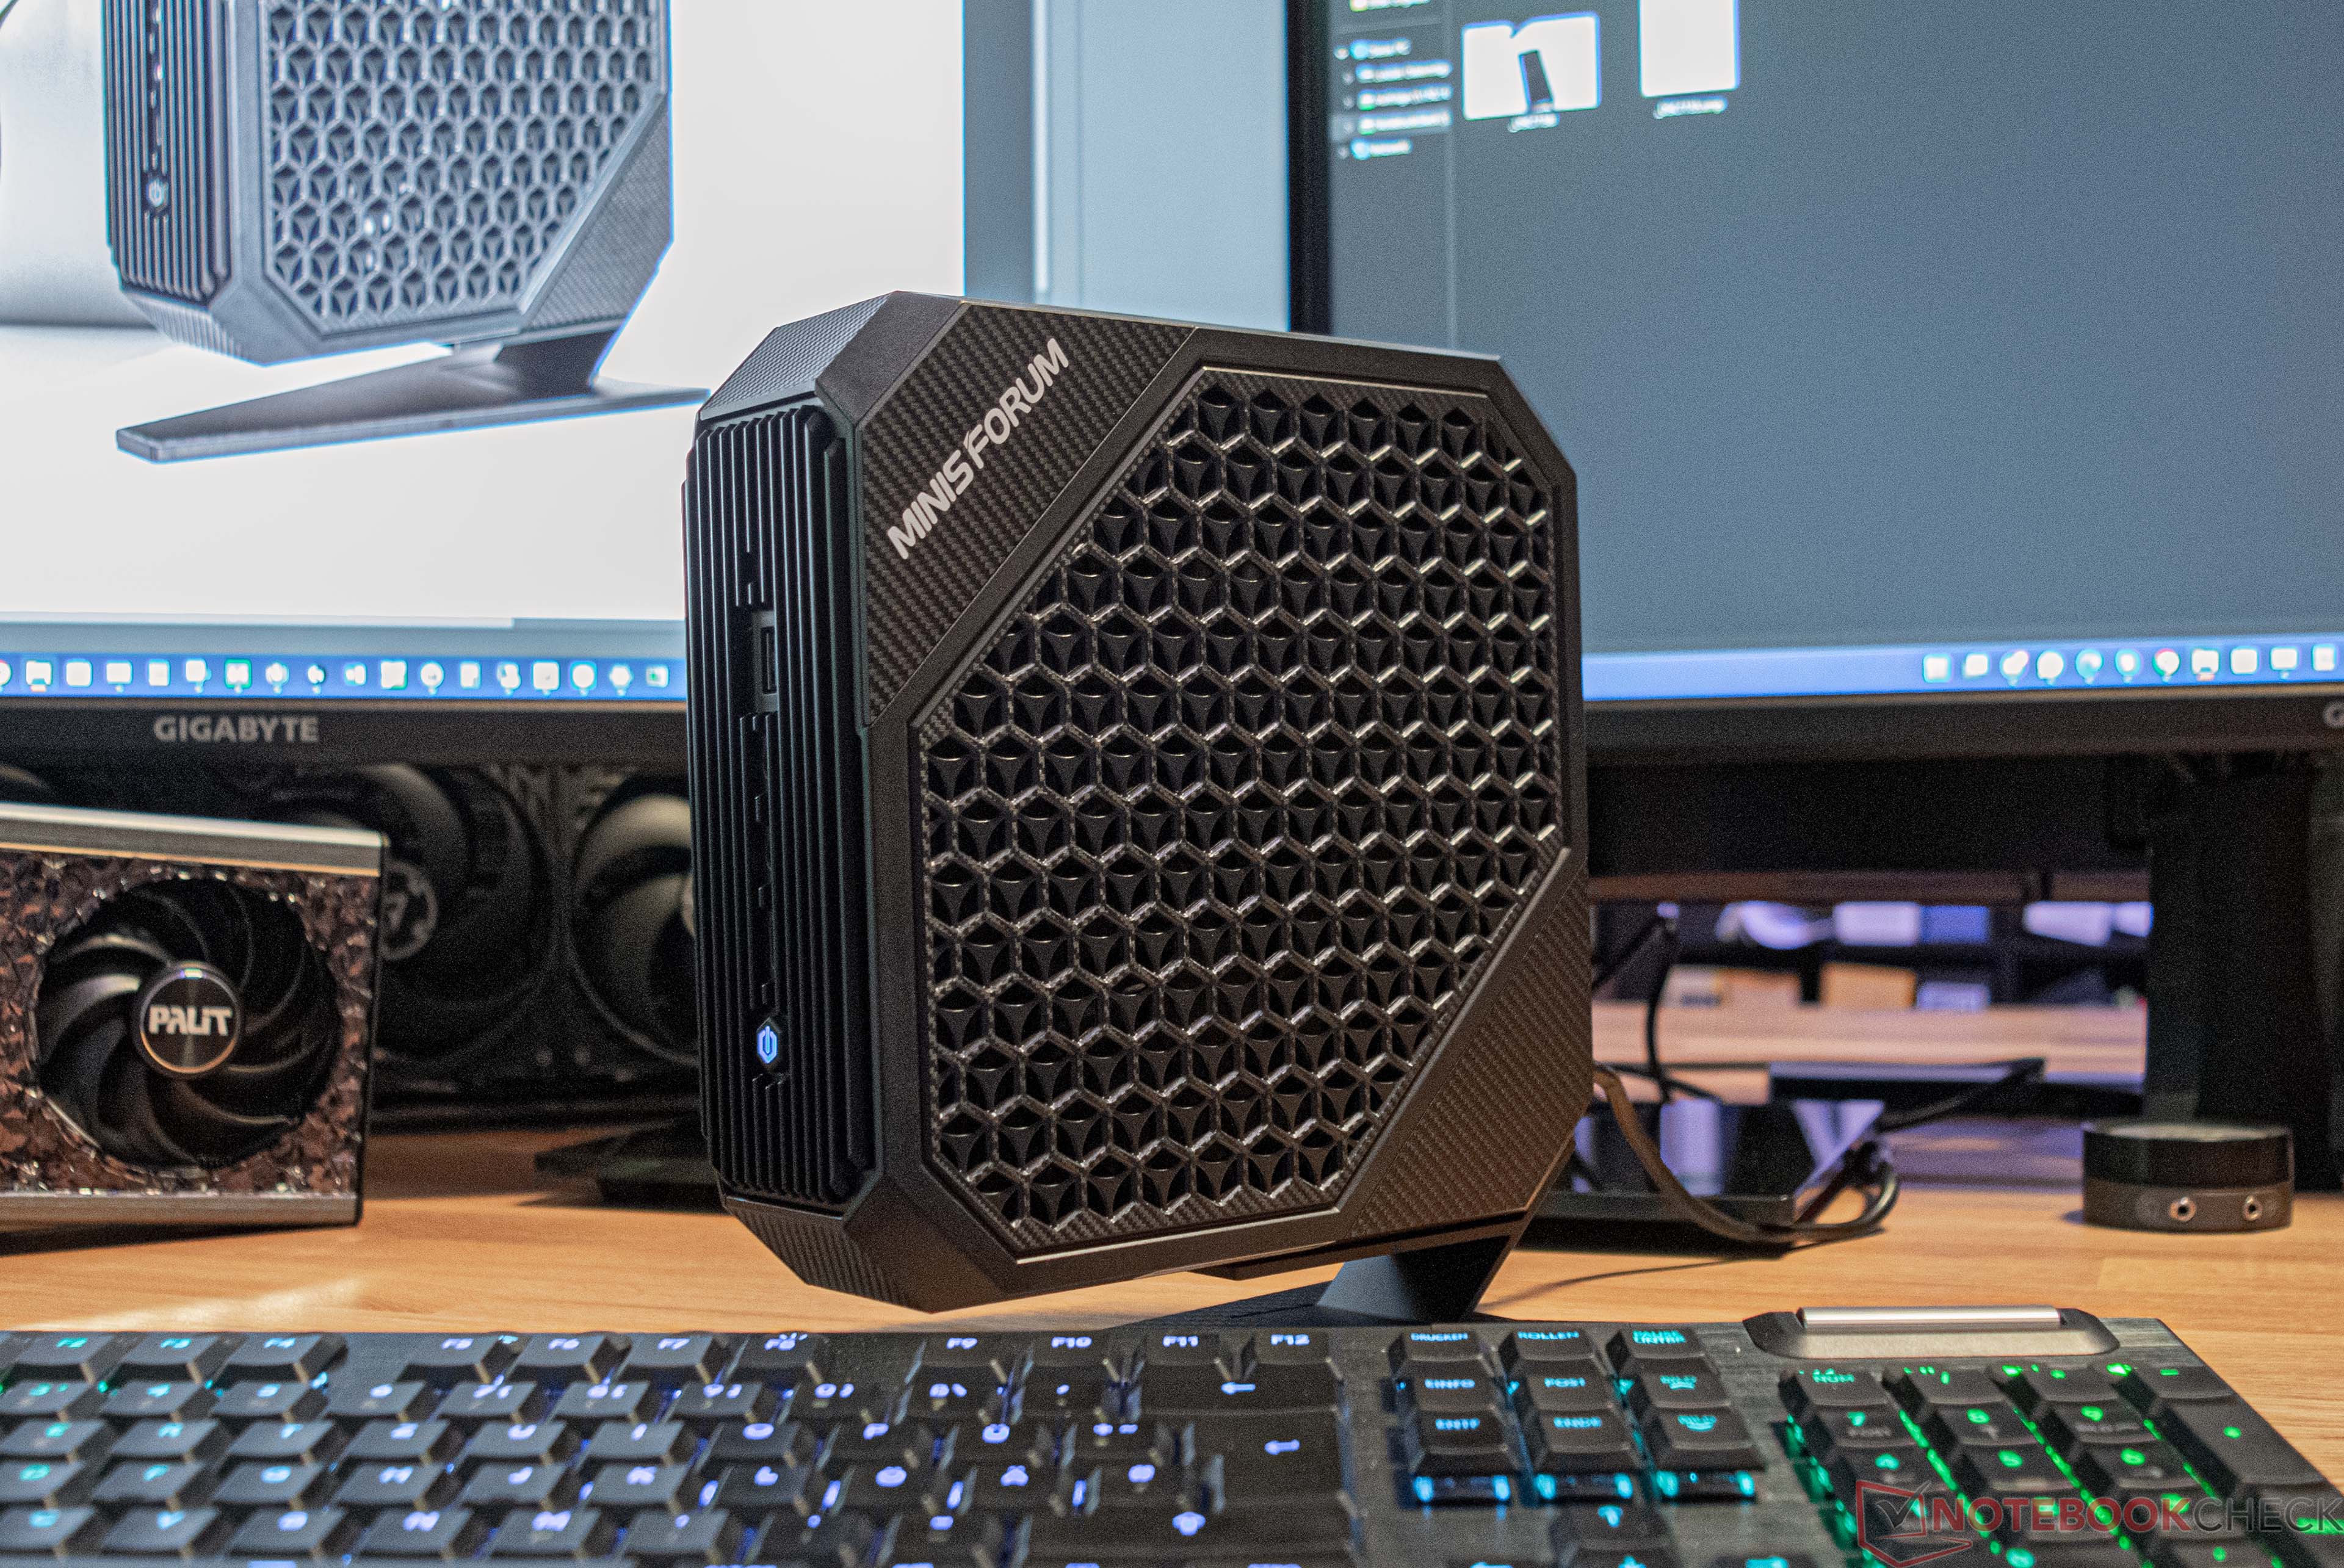 Minisforum Neptune Series HX99G review: Compact gaming PC with AMD Ryzen 9  6900HX and AMD Radeon RX 6600M also includes USB4 and Thunderbolt -   Reviews